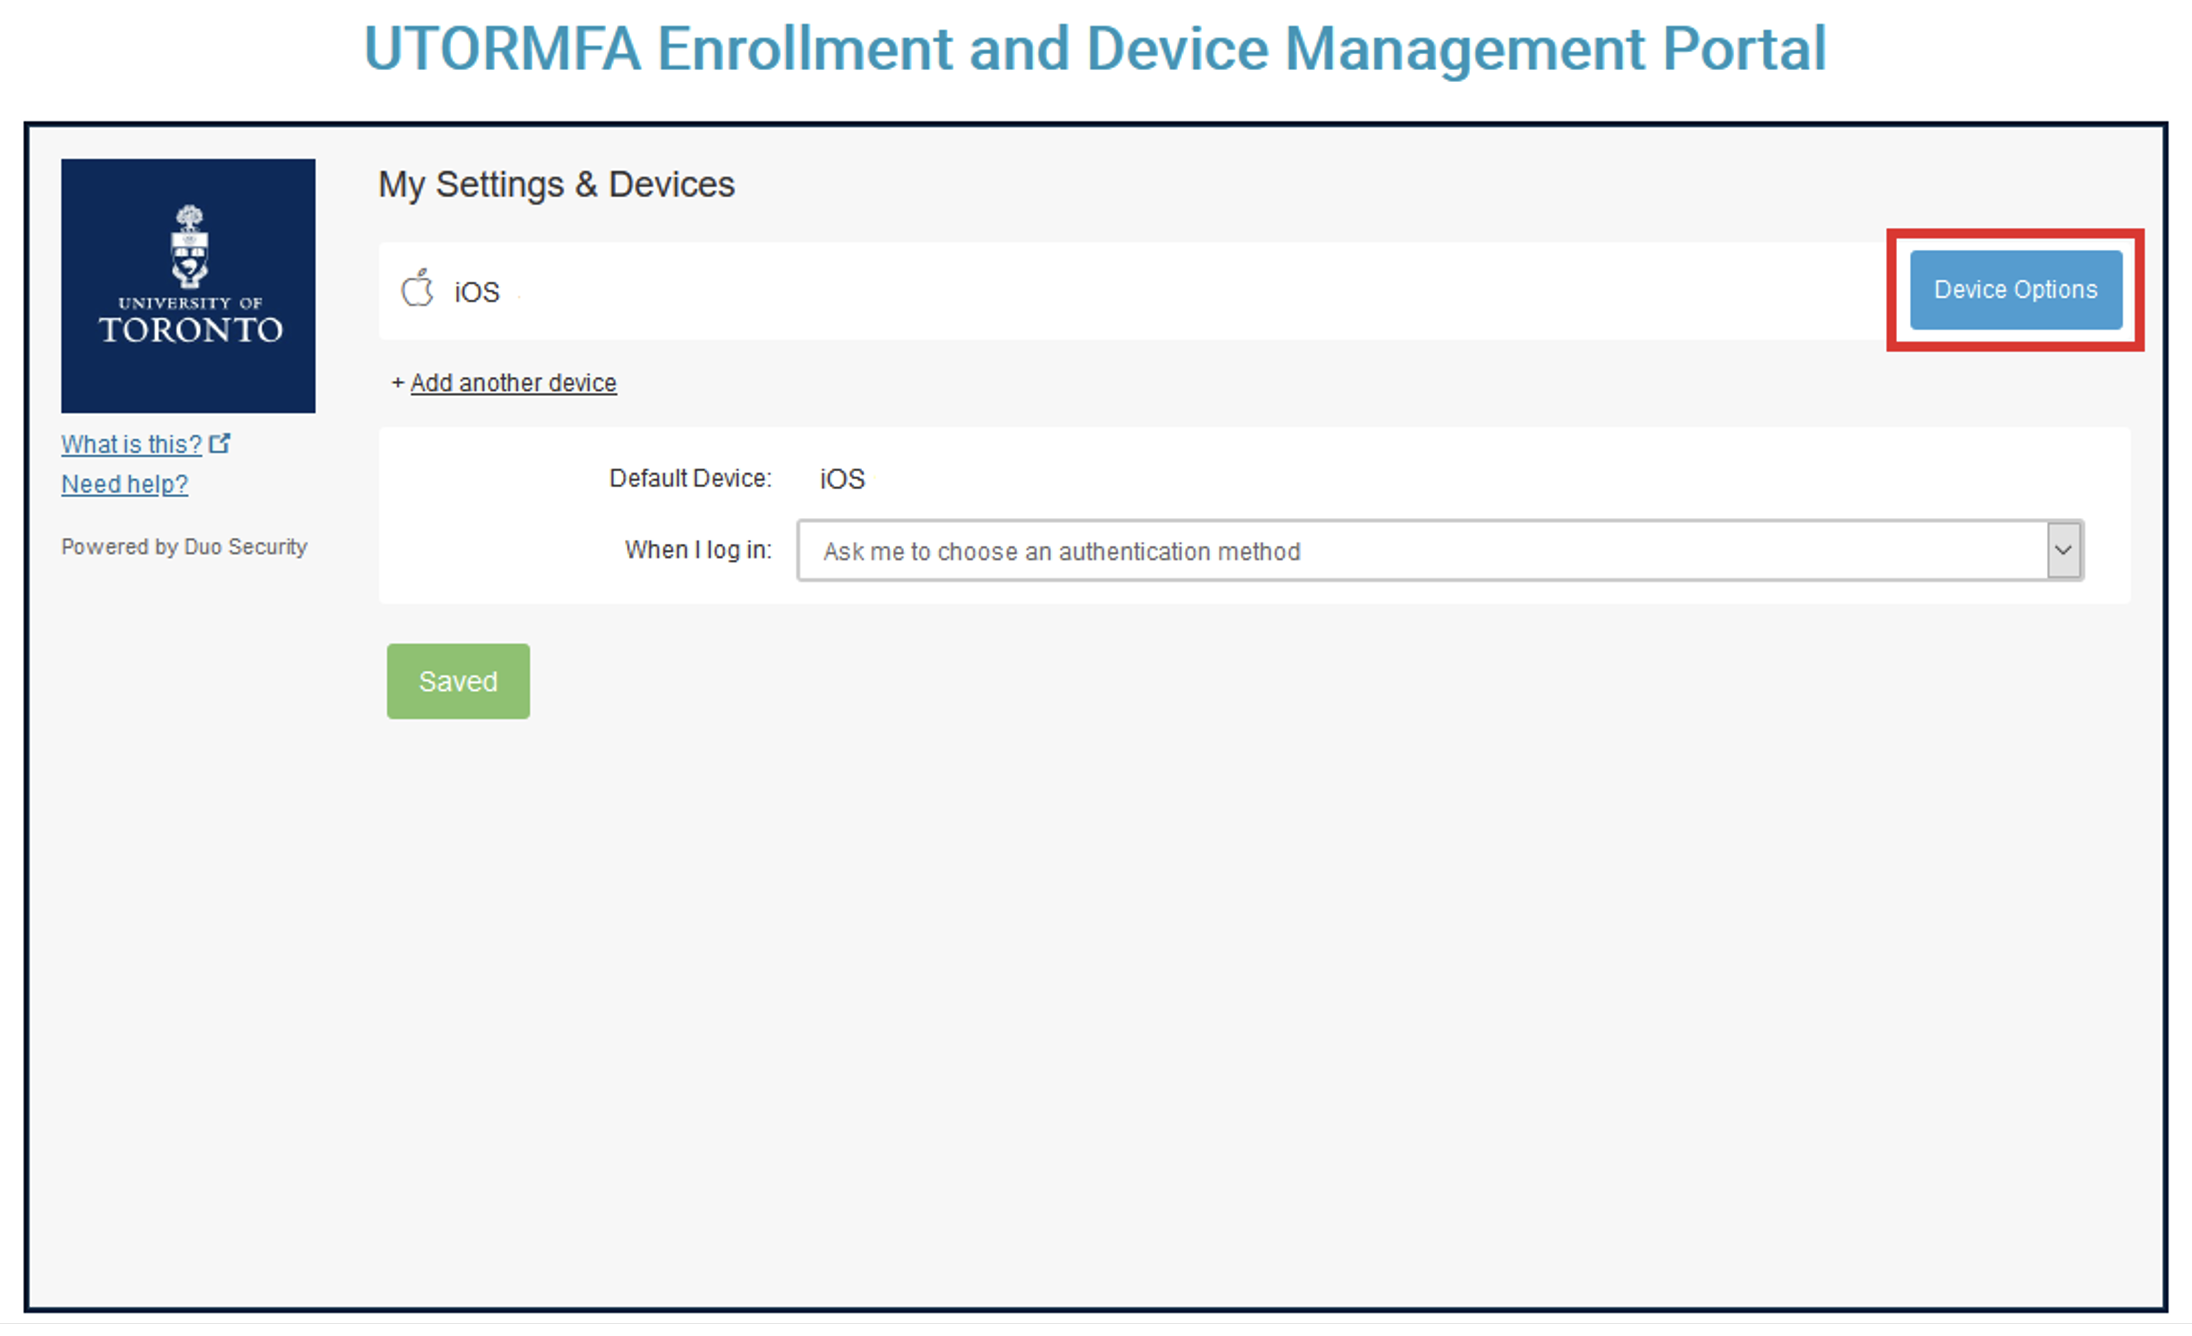 Screenshot of the UTORMFA enrollment and device management portal with the button "Device options" highlighted.